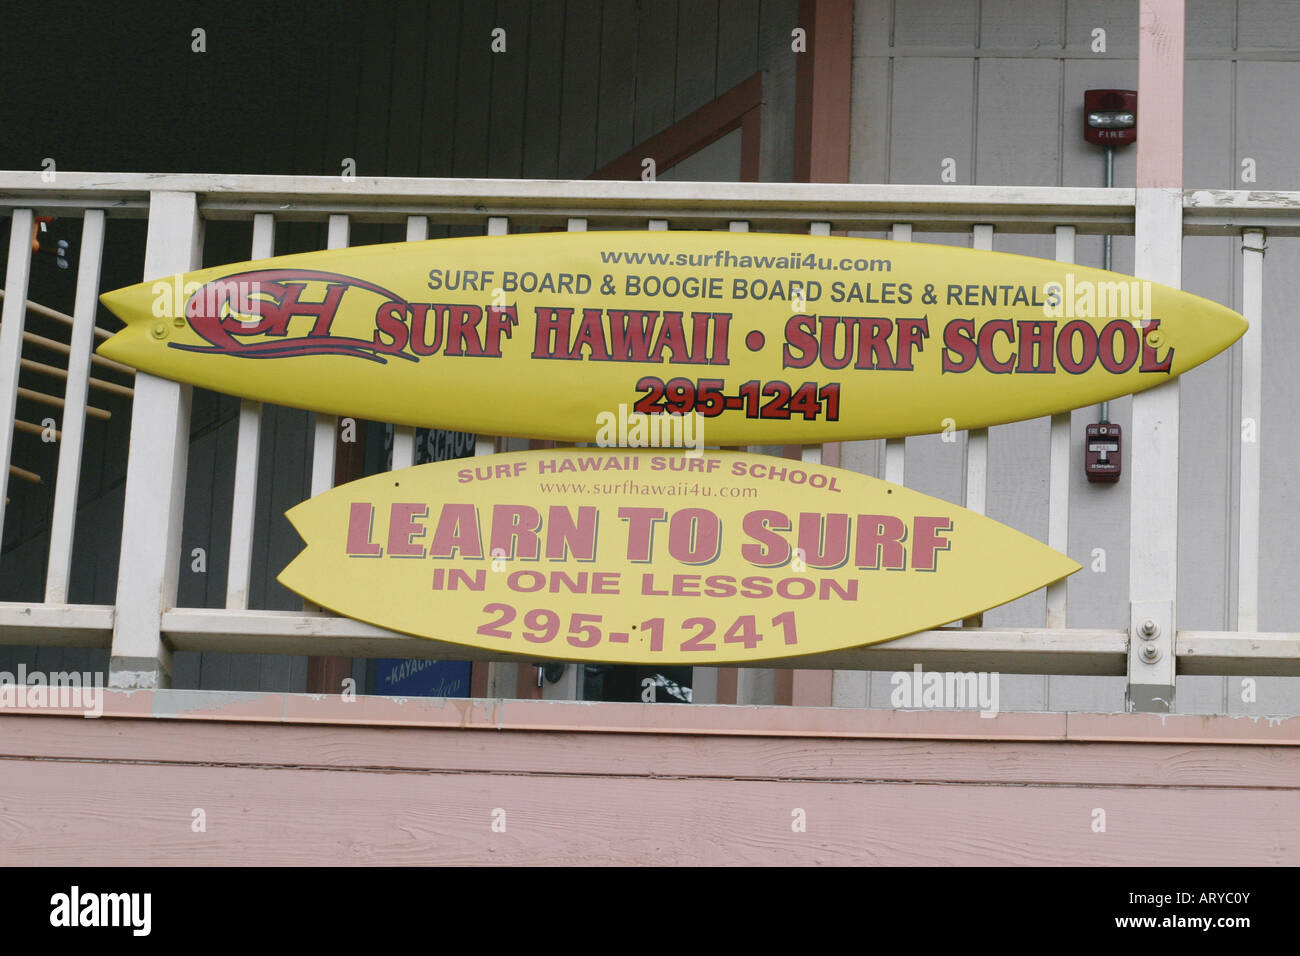 Learn to surf the north shore waves at a legitimate surfing school. This school located at the North Shore Marketplace in the Stock Photo